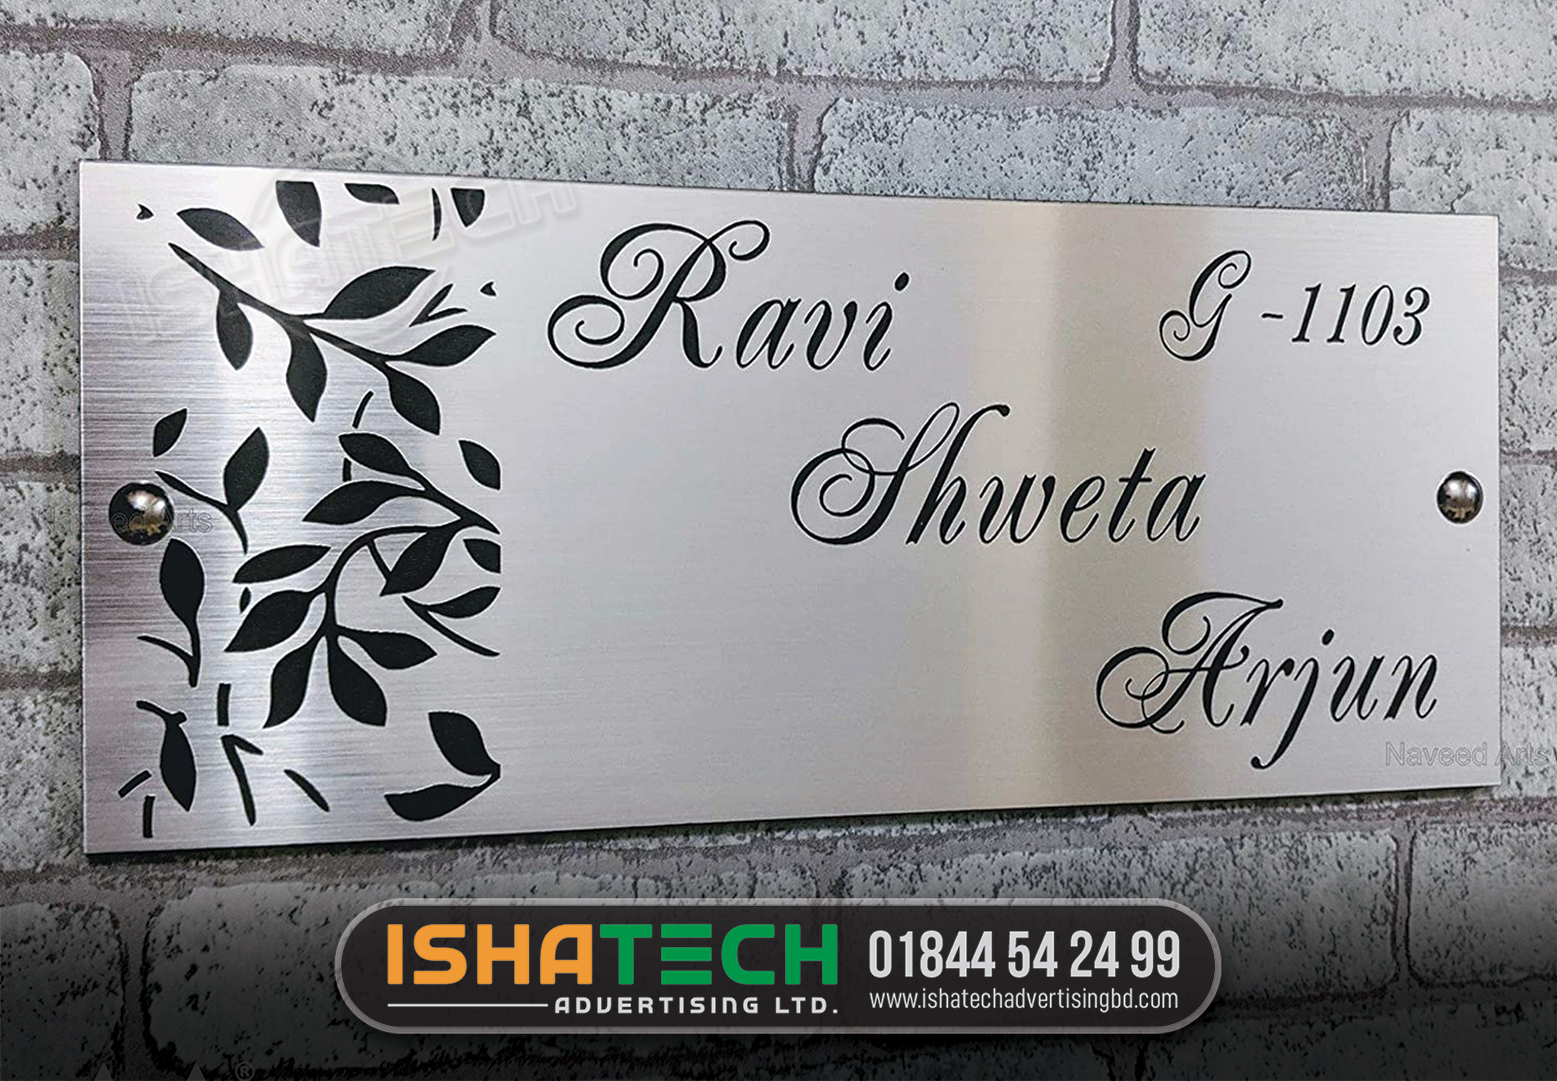 HOUSE OUTDOOR NAME PLATE SIGNS | NAME PLATE MAKER SHOP | NAME PLATE SUPPLIER | CUSTOM SS NAME PLATE BD